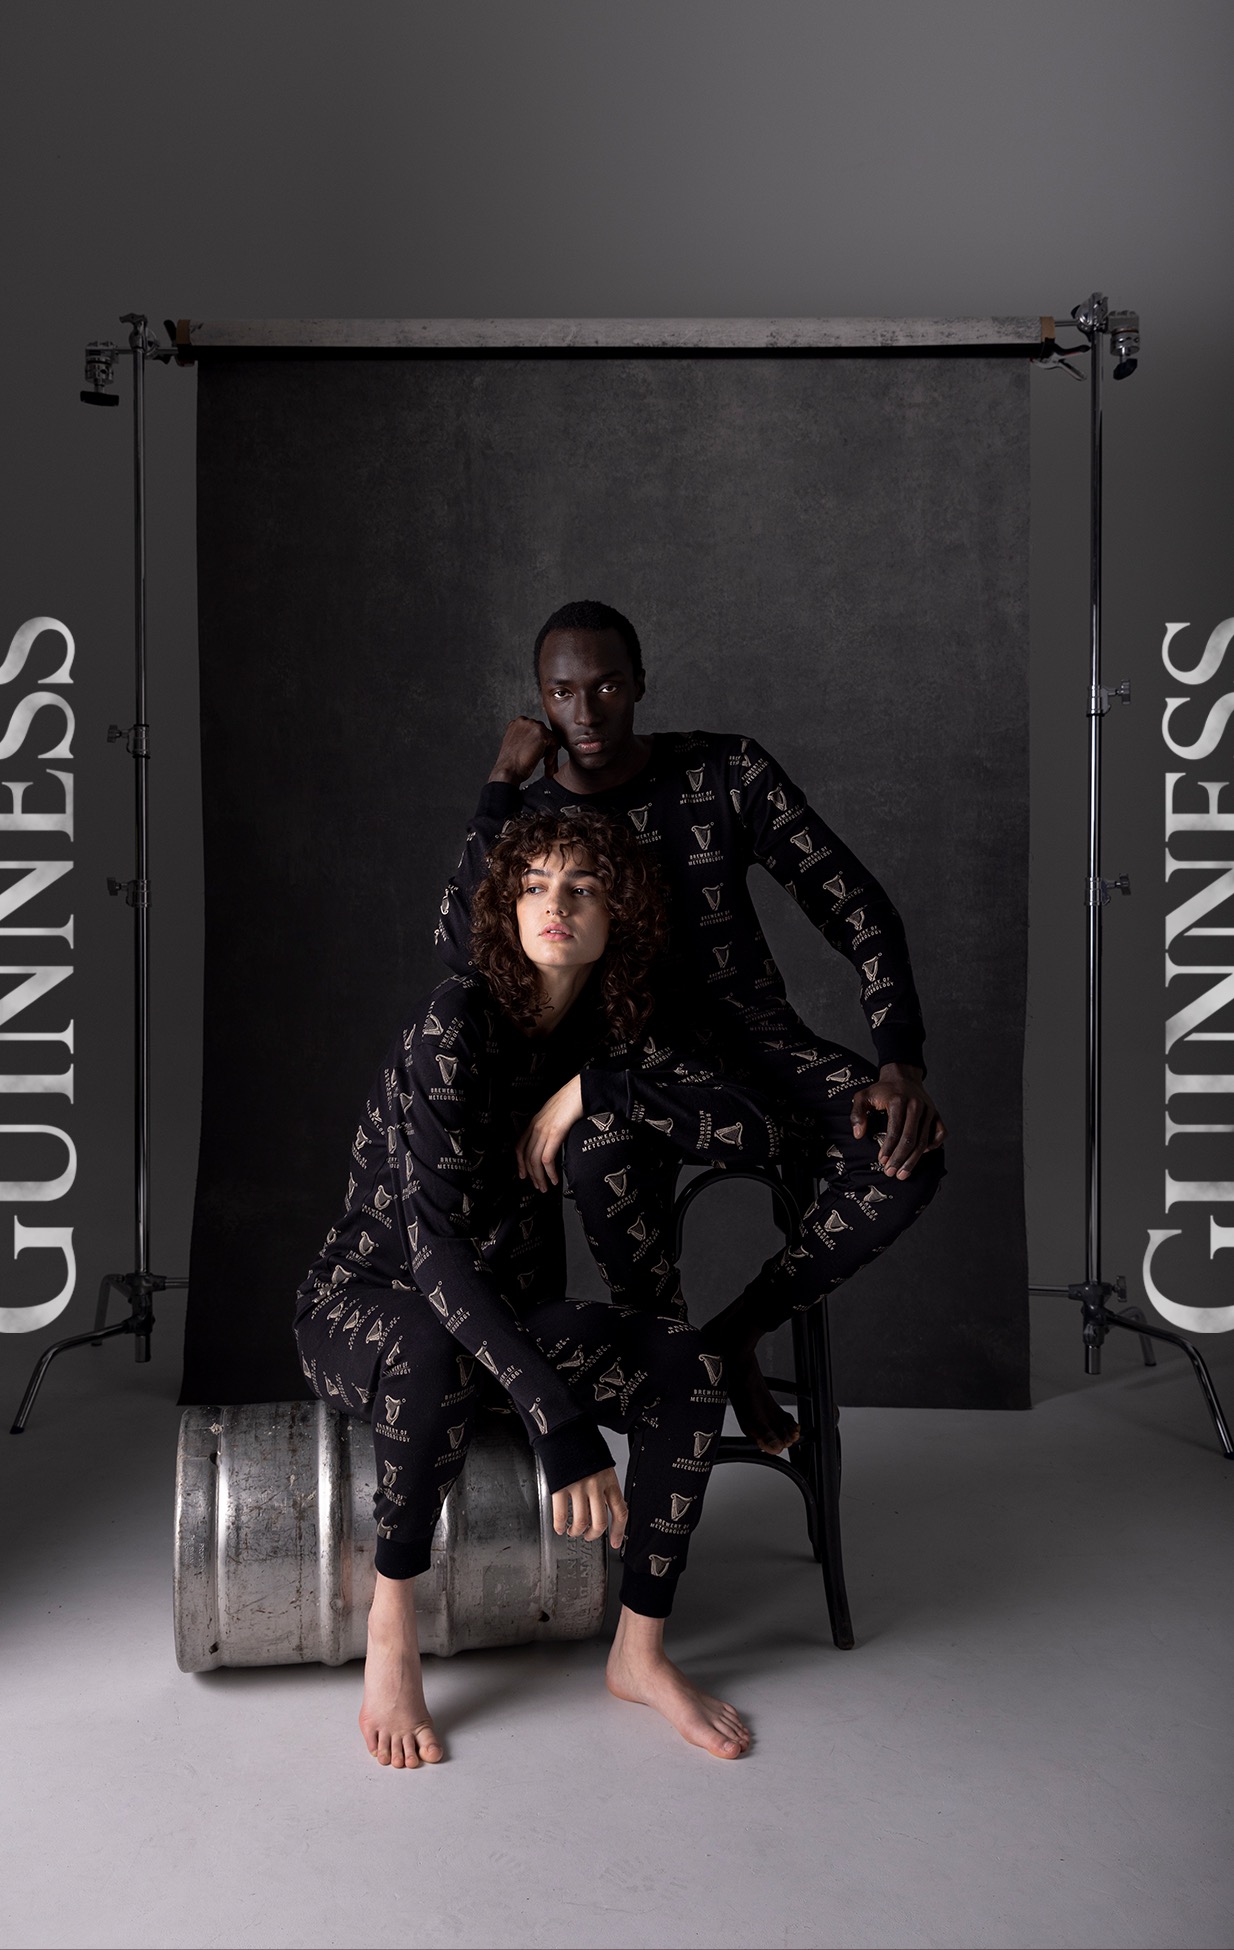 Guinness Brewery of Meteorology launches for optimal drinking conditions this winter in newly launched campaign via Thinkerbell